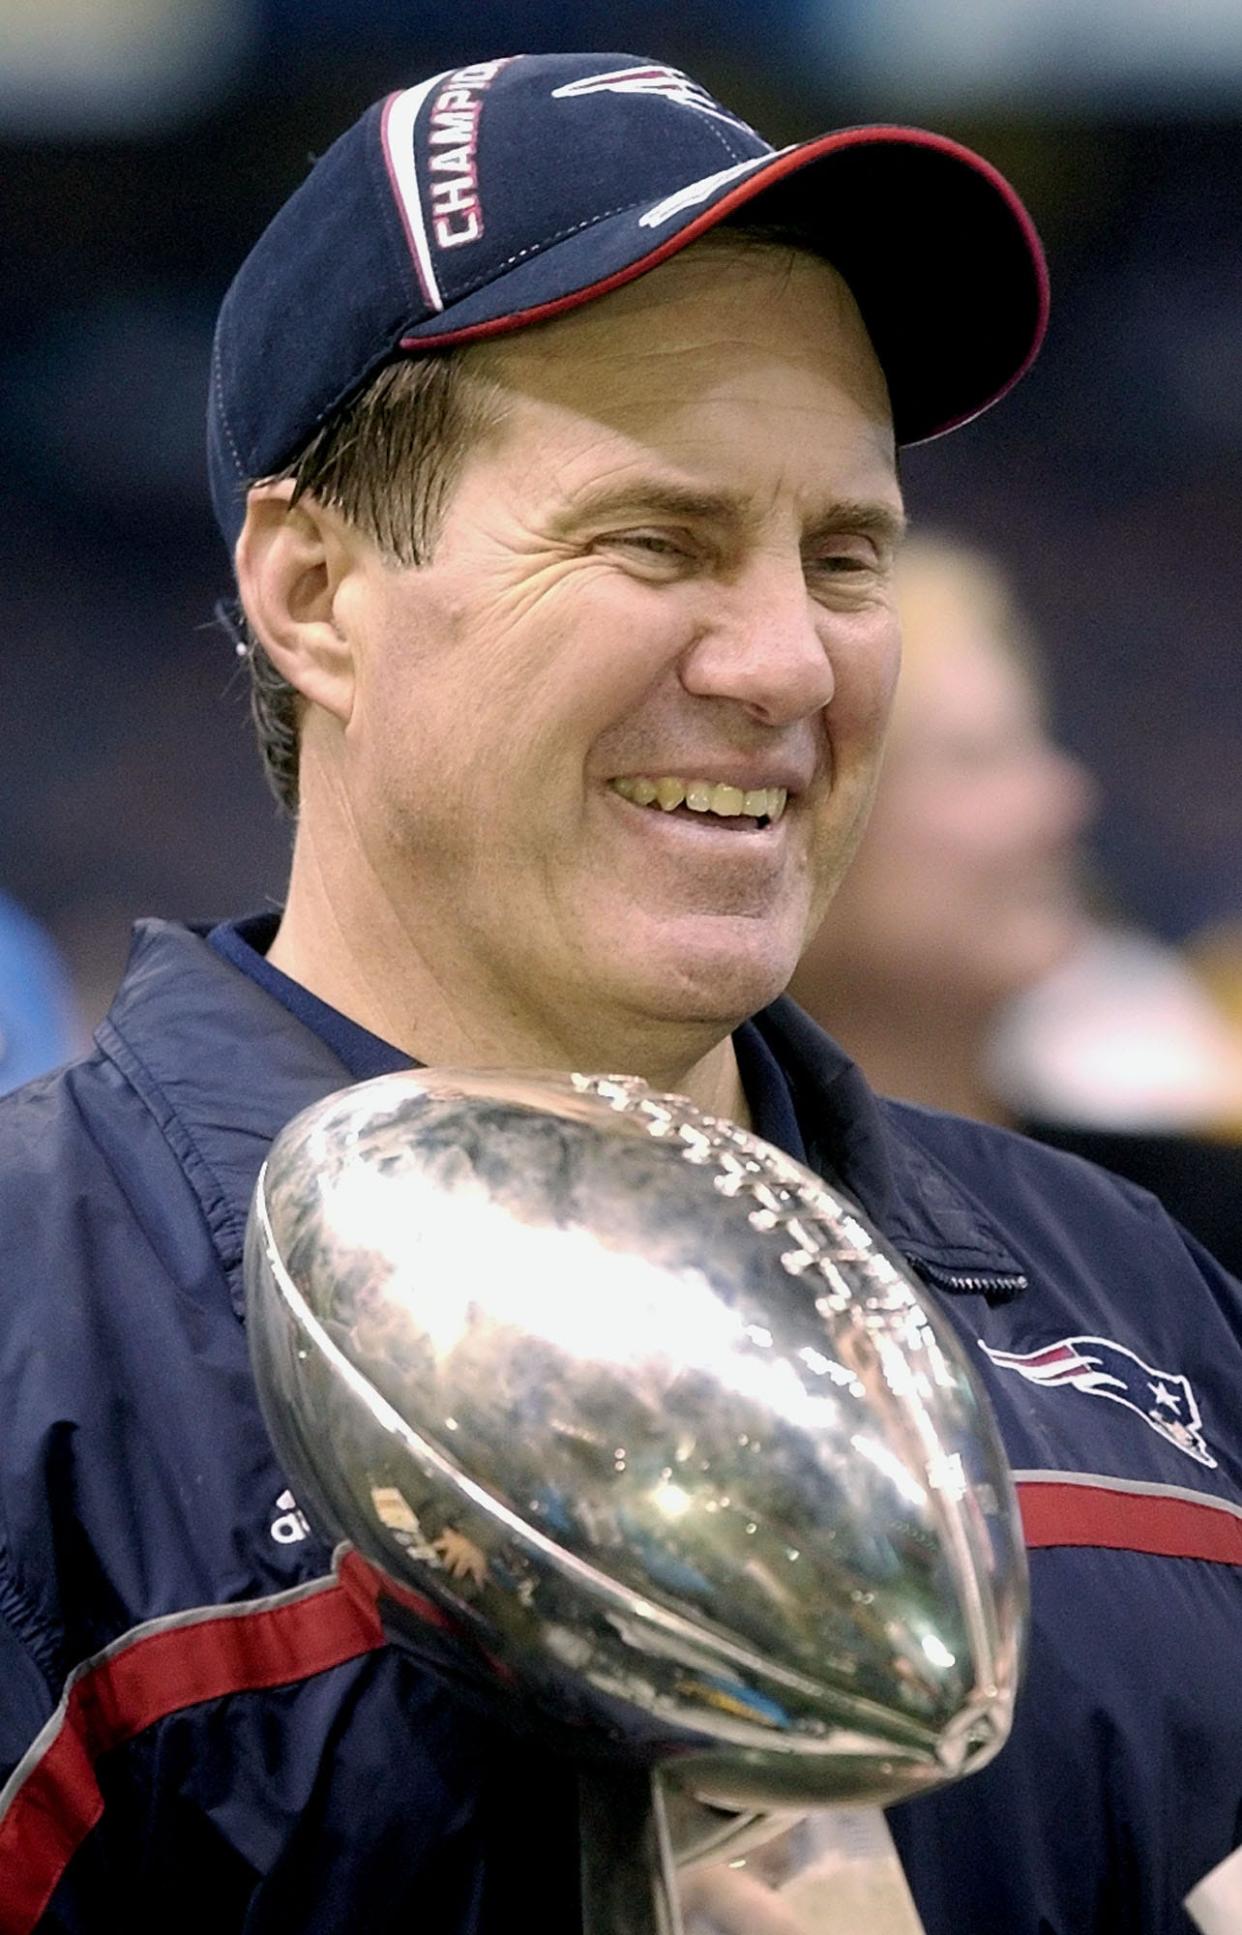 New England Patriots' coach Bill Belichick holds the Super Bowl trophy after the Patriots beat the St. Louis Rams 20-17 in Super Bowl XXXVI at the Louisiana Superdome in 2002.